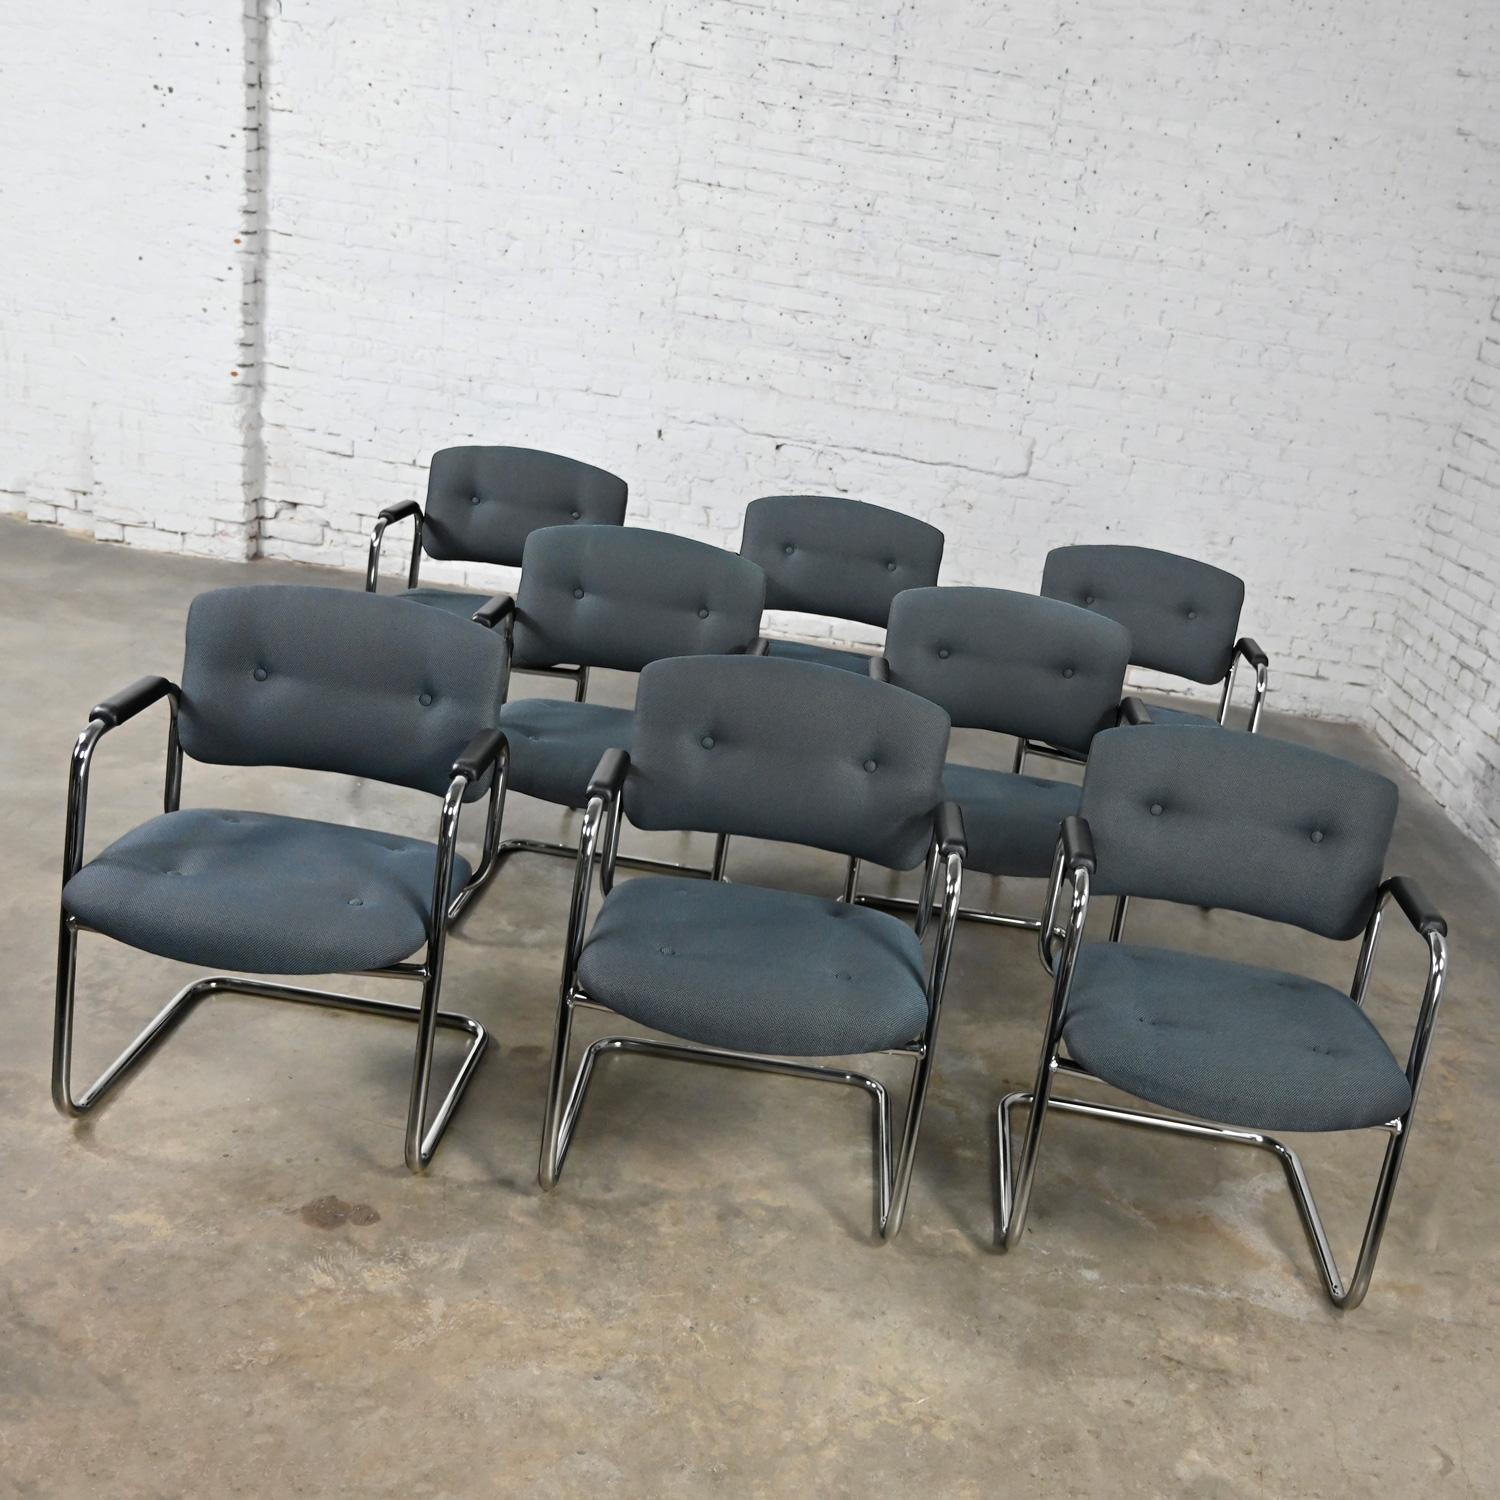 Awesome gray & chrome vintage cantilever chairs by United Chair Company in the style of Steelcase, set of 8. Comprised of a chrome cantilever frame, black plastic armrests, and their original gray tweed fabric with button details. This listing is